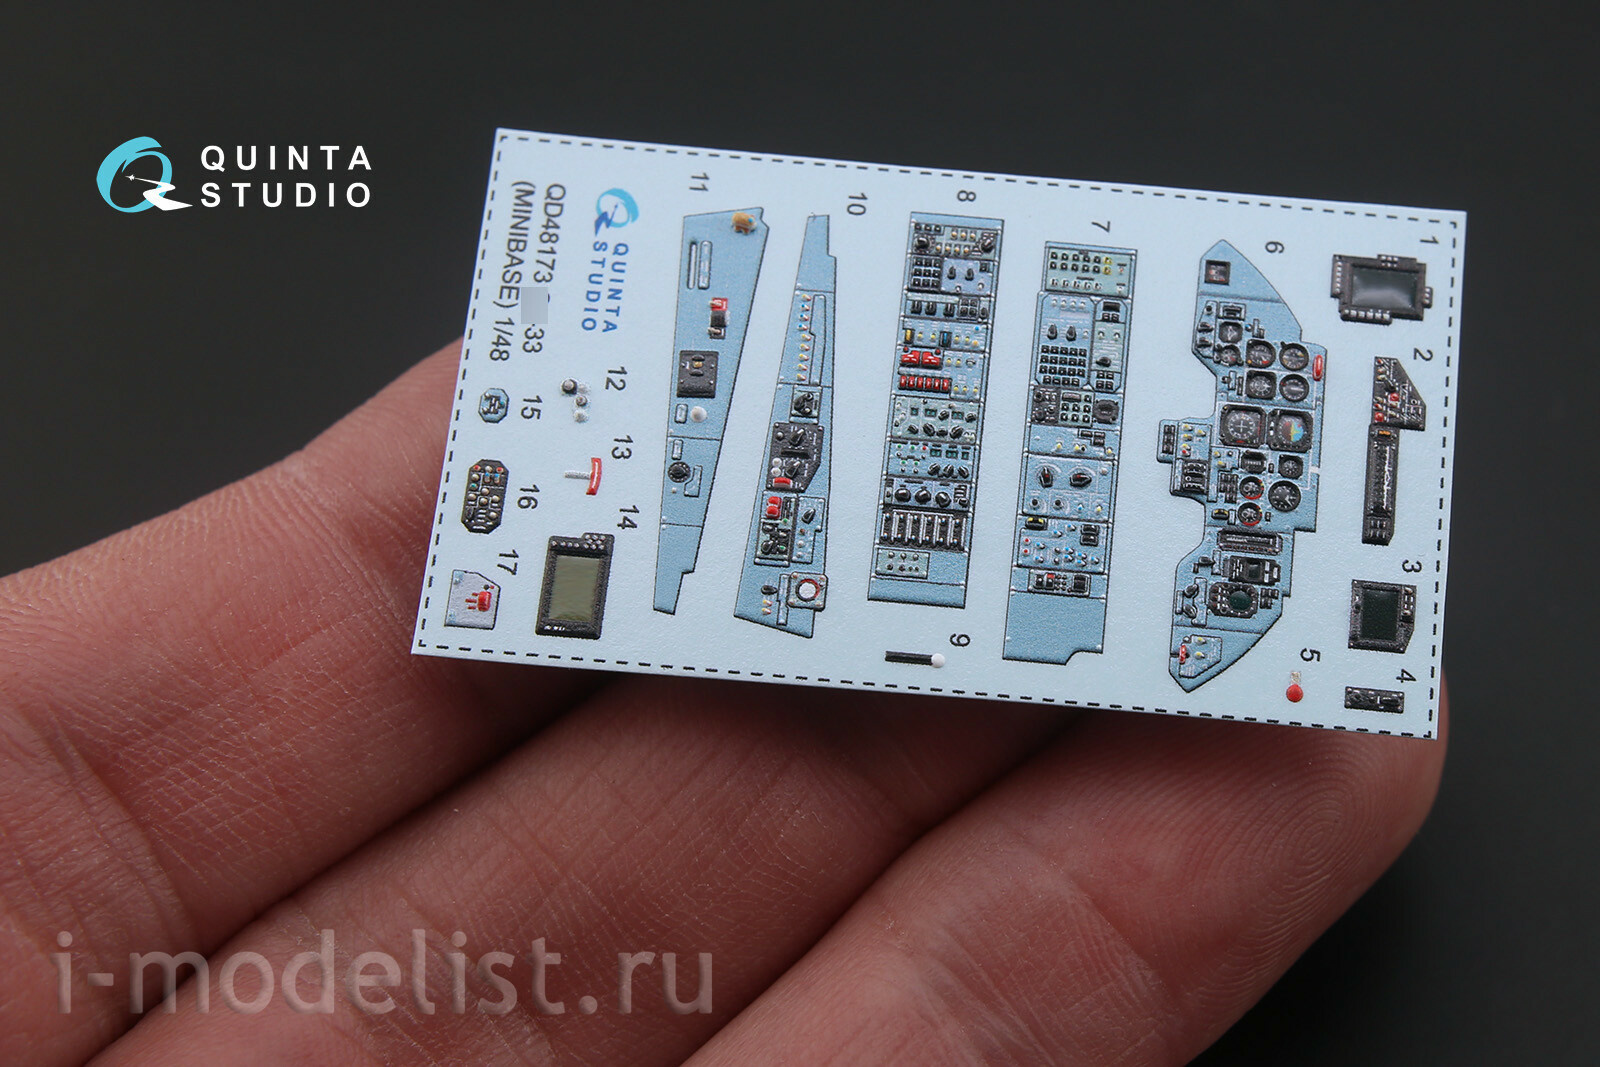 QD48173 Quinta Studio 1/48 3D Decal of the cabin interior Sukhoi-33 (for the Minibase model)